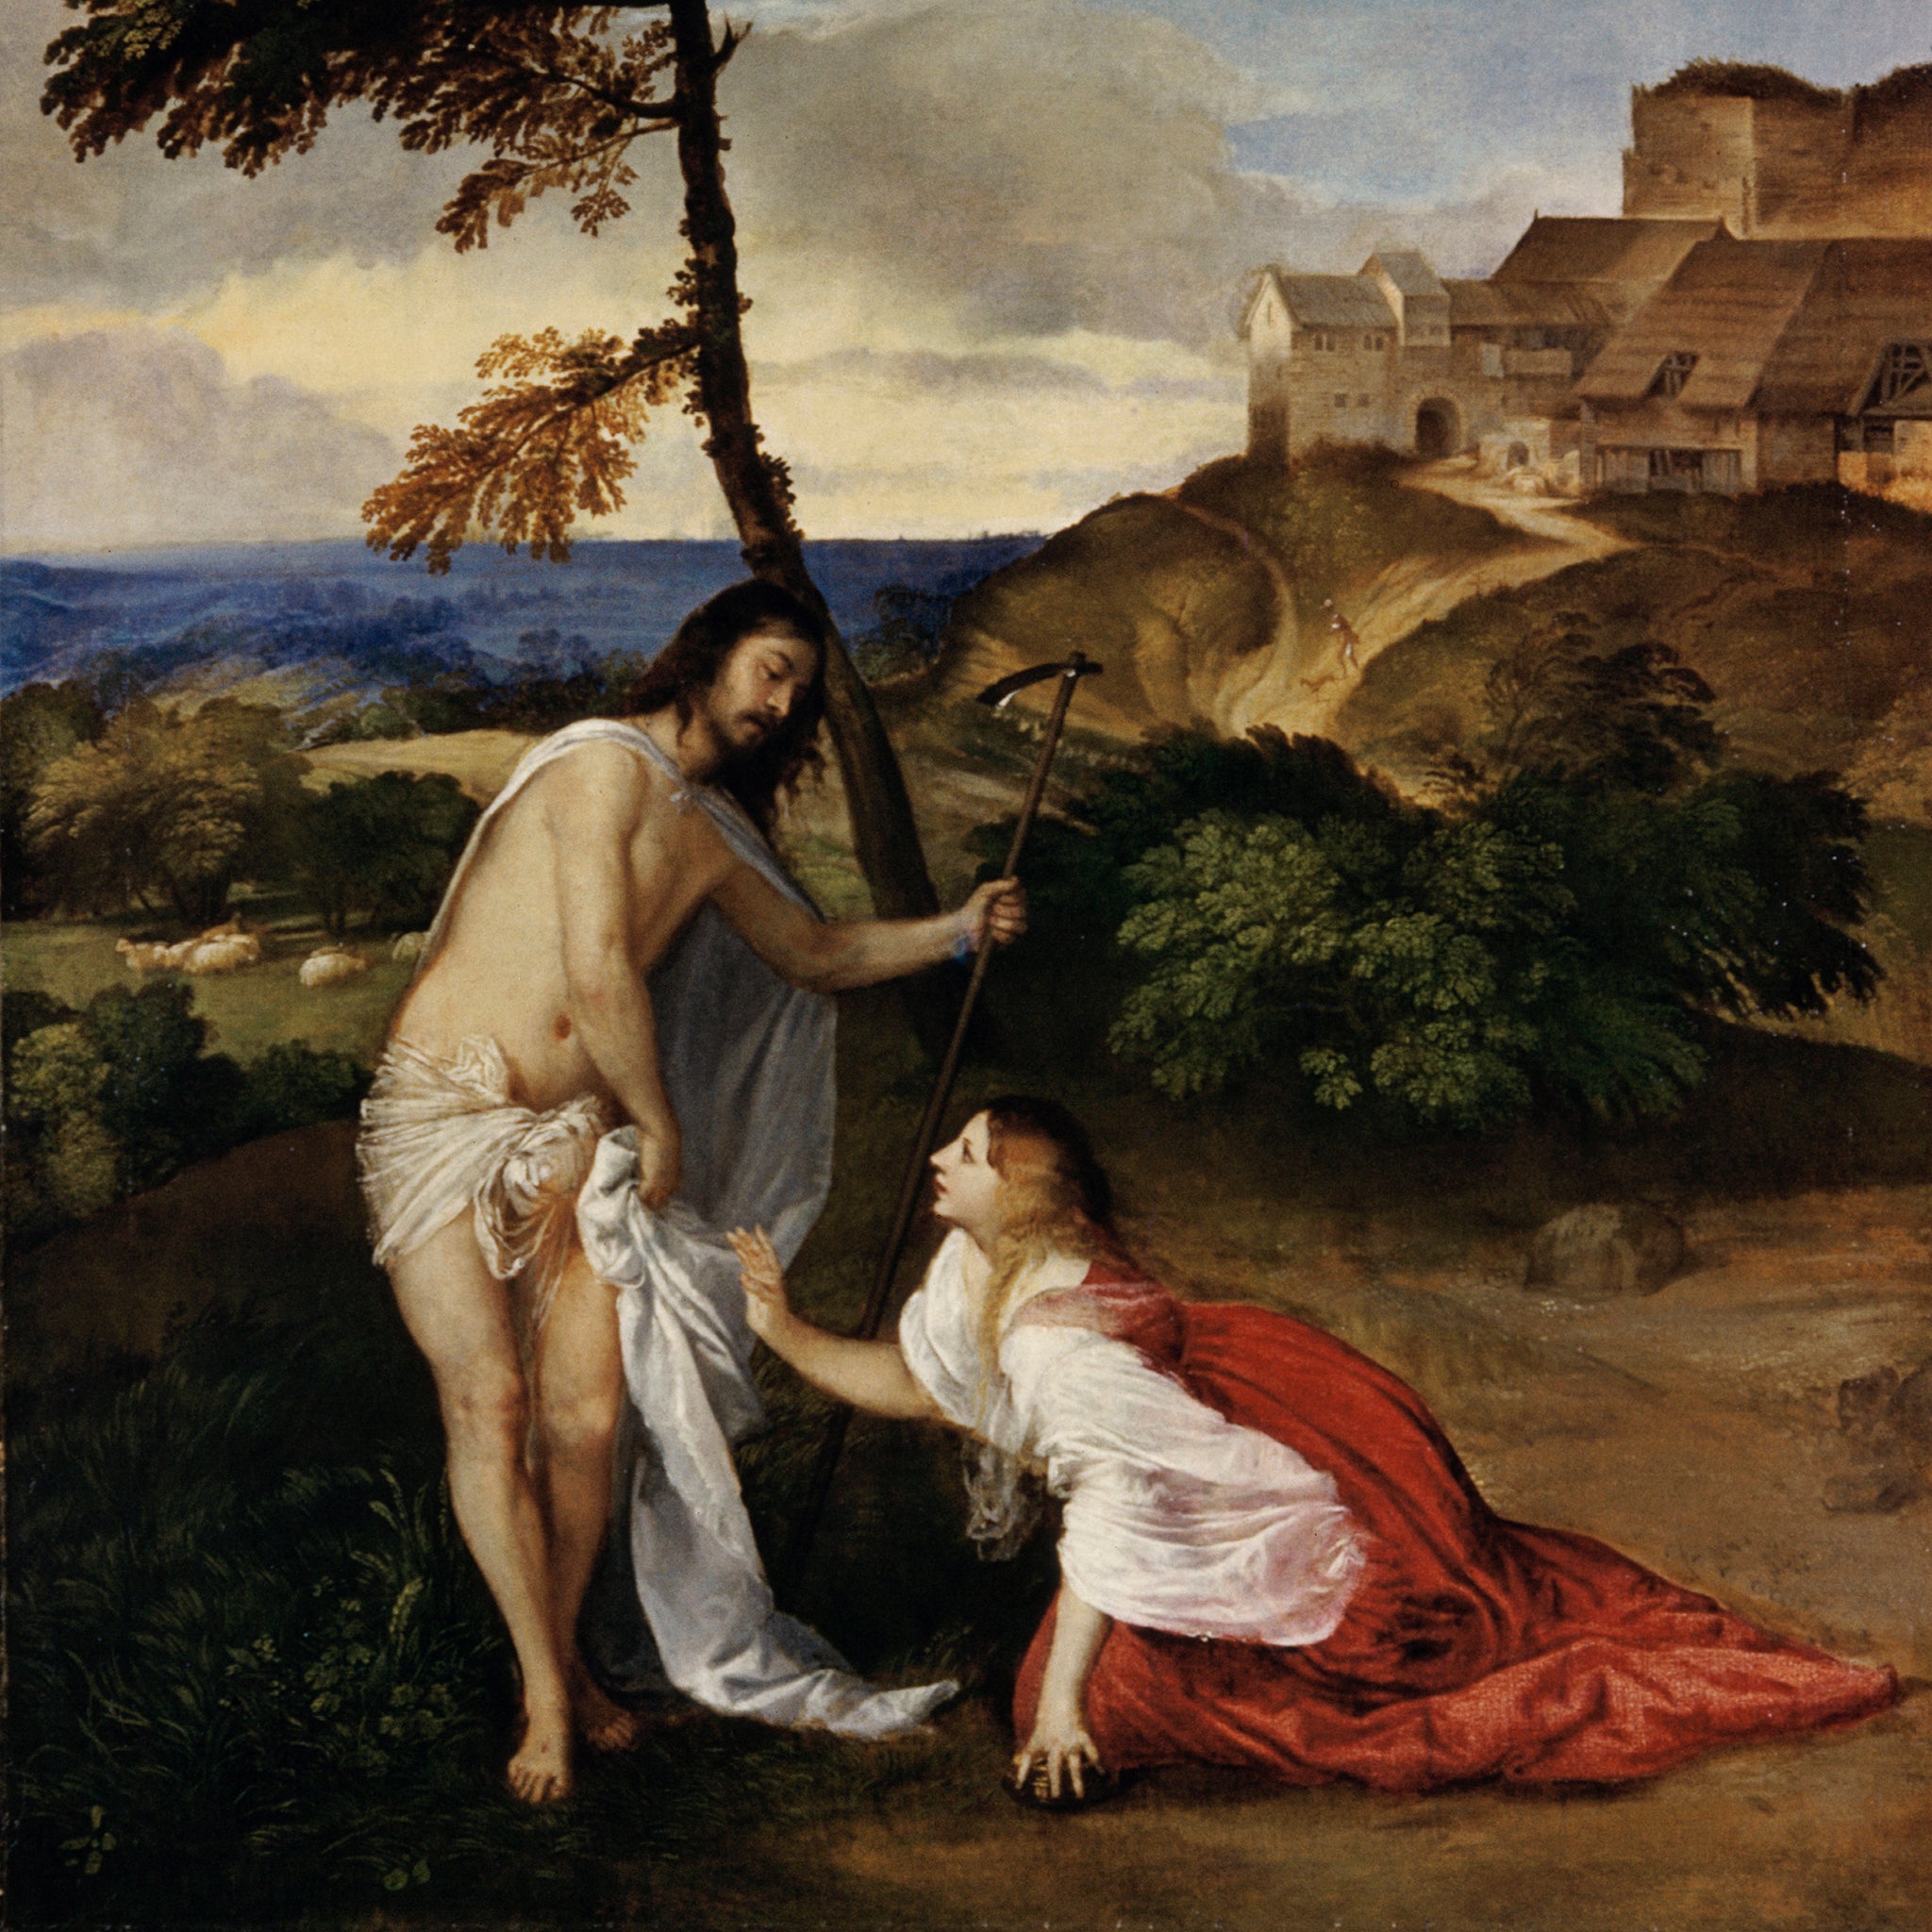 Noli me Tangere, c.1512 (oil on canvas) by Titian (Tiziano Vecellio) (c.1488-1576); National Gallery, London